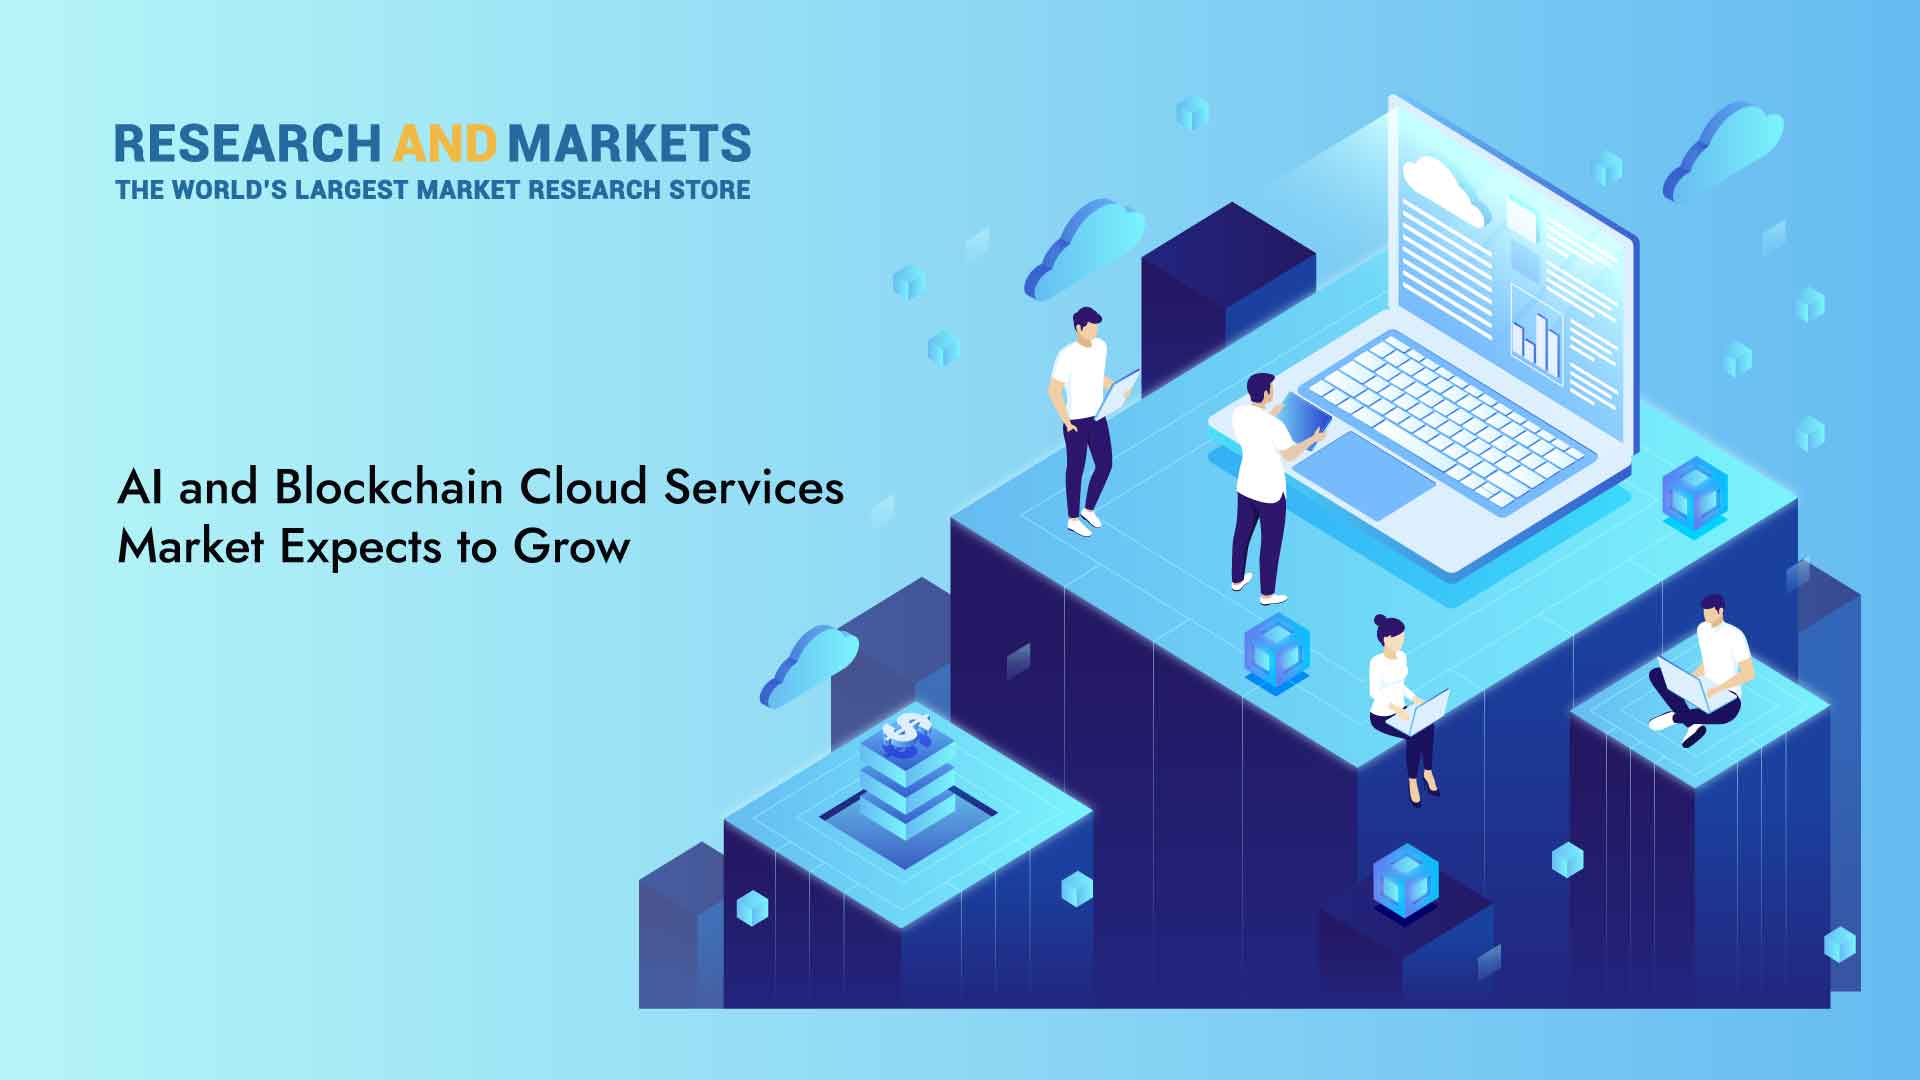 AI And Blockchain Cloud Services Global Market Report 2022: Big Data Analytics and Growing Need for Increased Computing Power Bolsters Sector